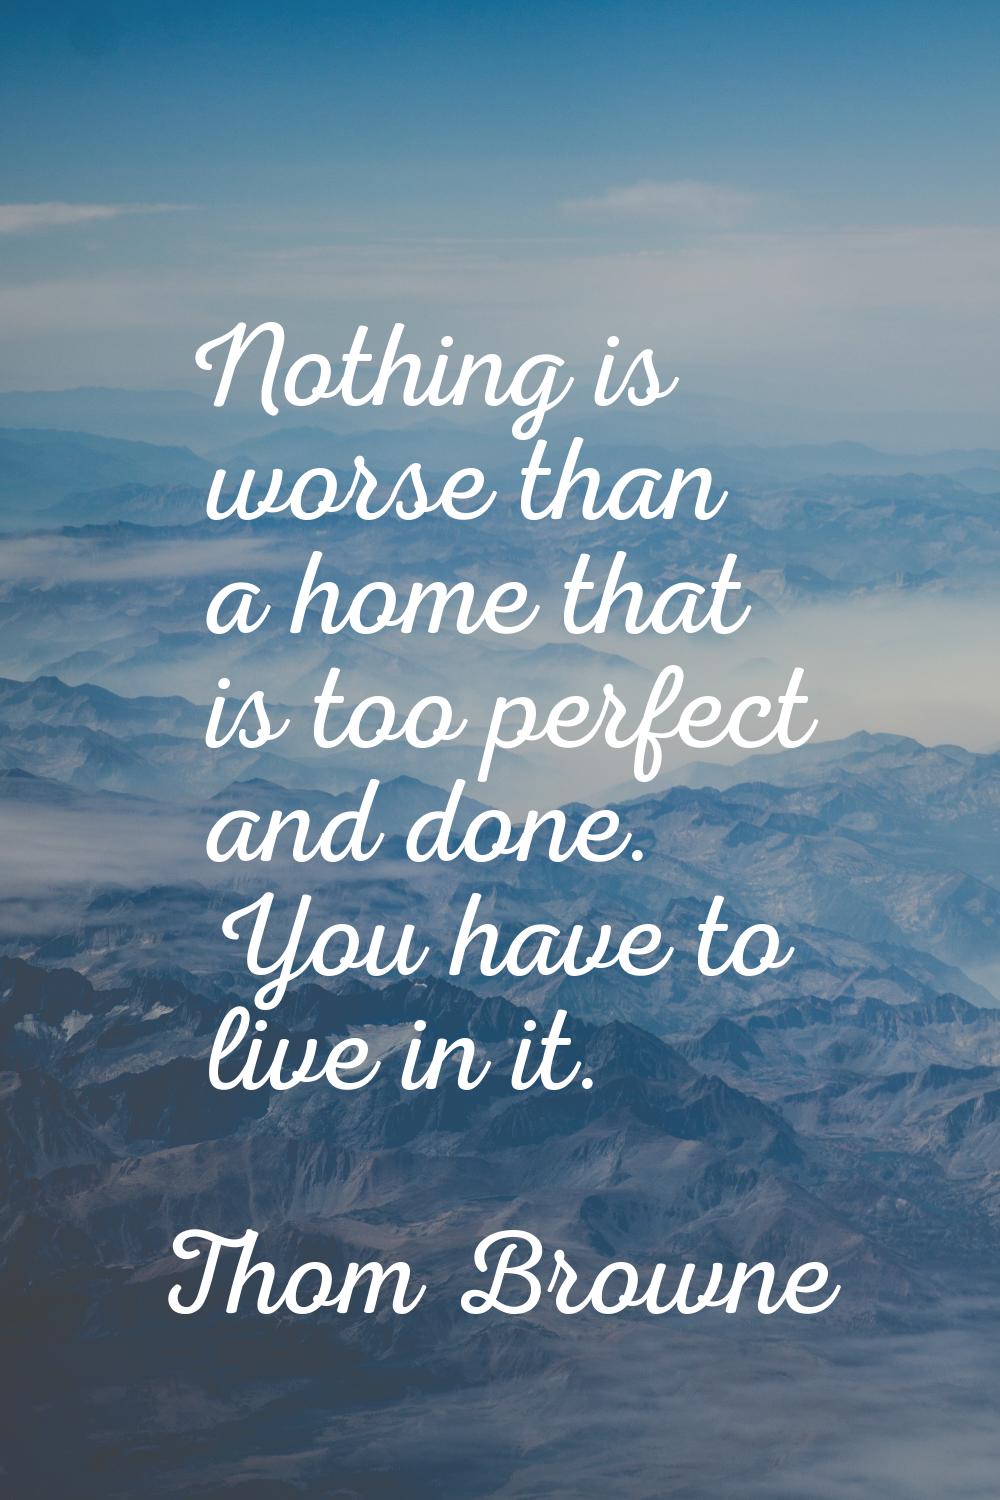 Nothing is worse than a home that is too perfect and done. You have to live in it.